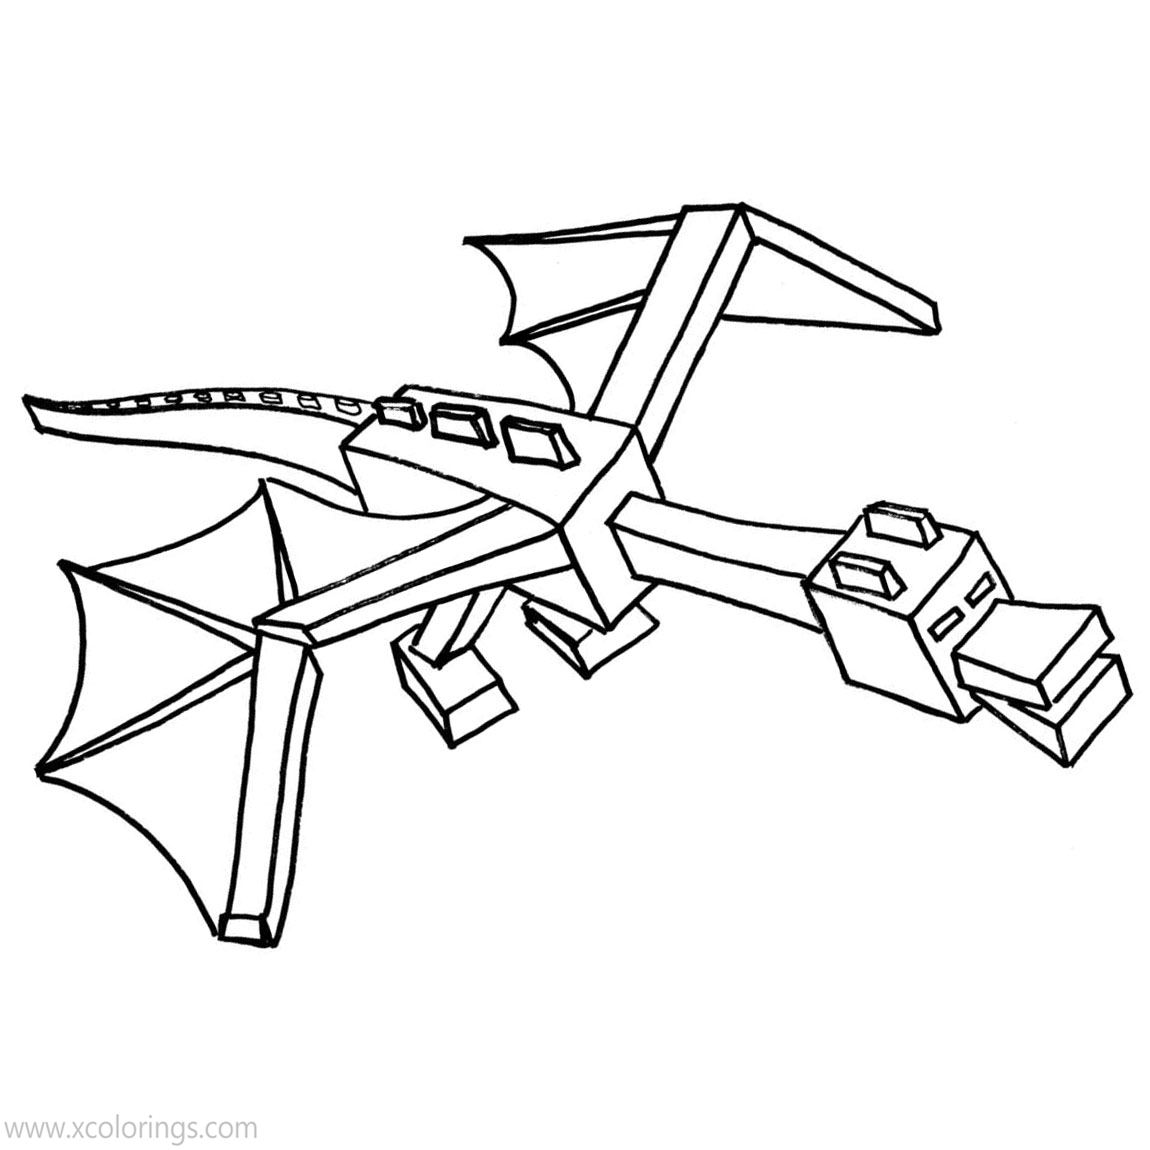 Free Minecraft Ender Dragon Coloring Pages Printable printable